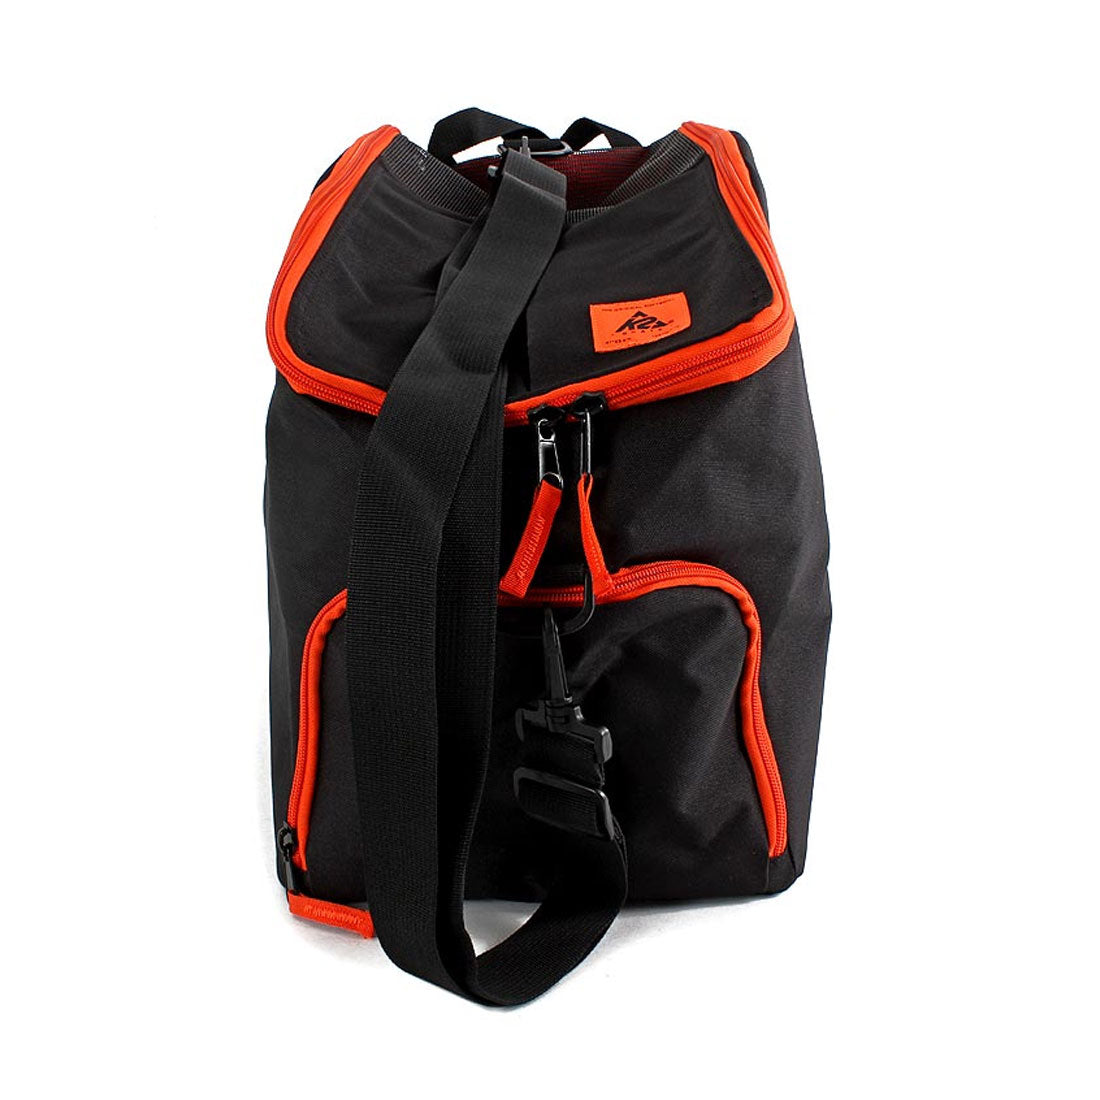 K2 FIT Carrier - Black/Red Bags and Backpacks